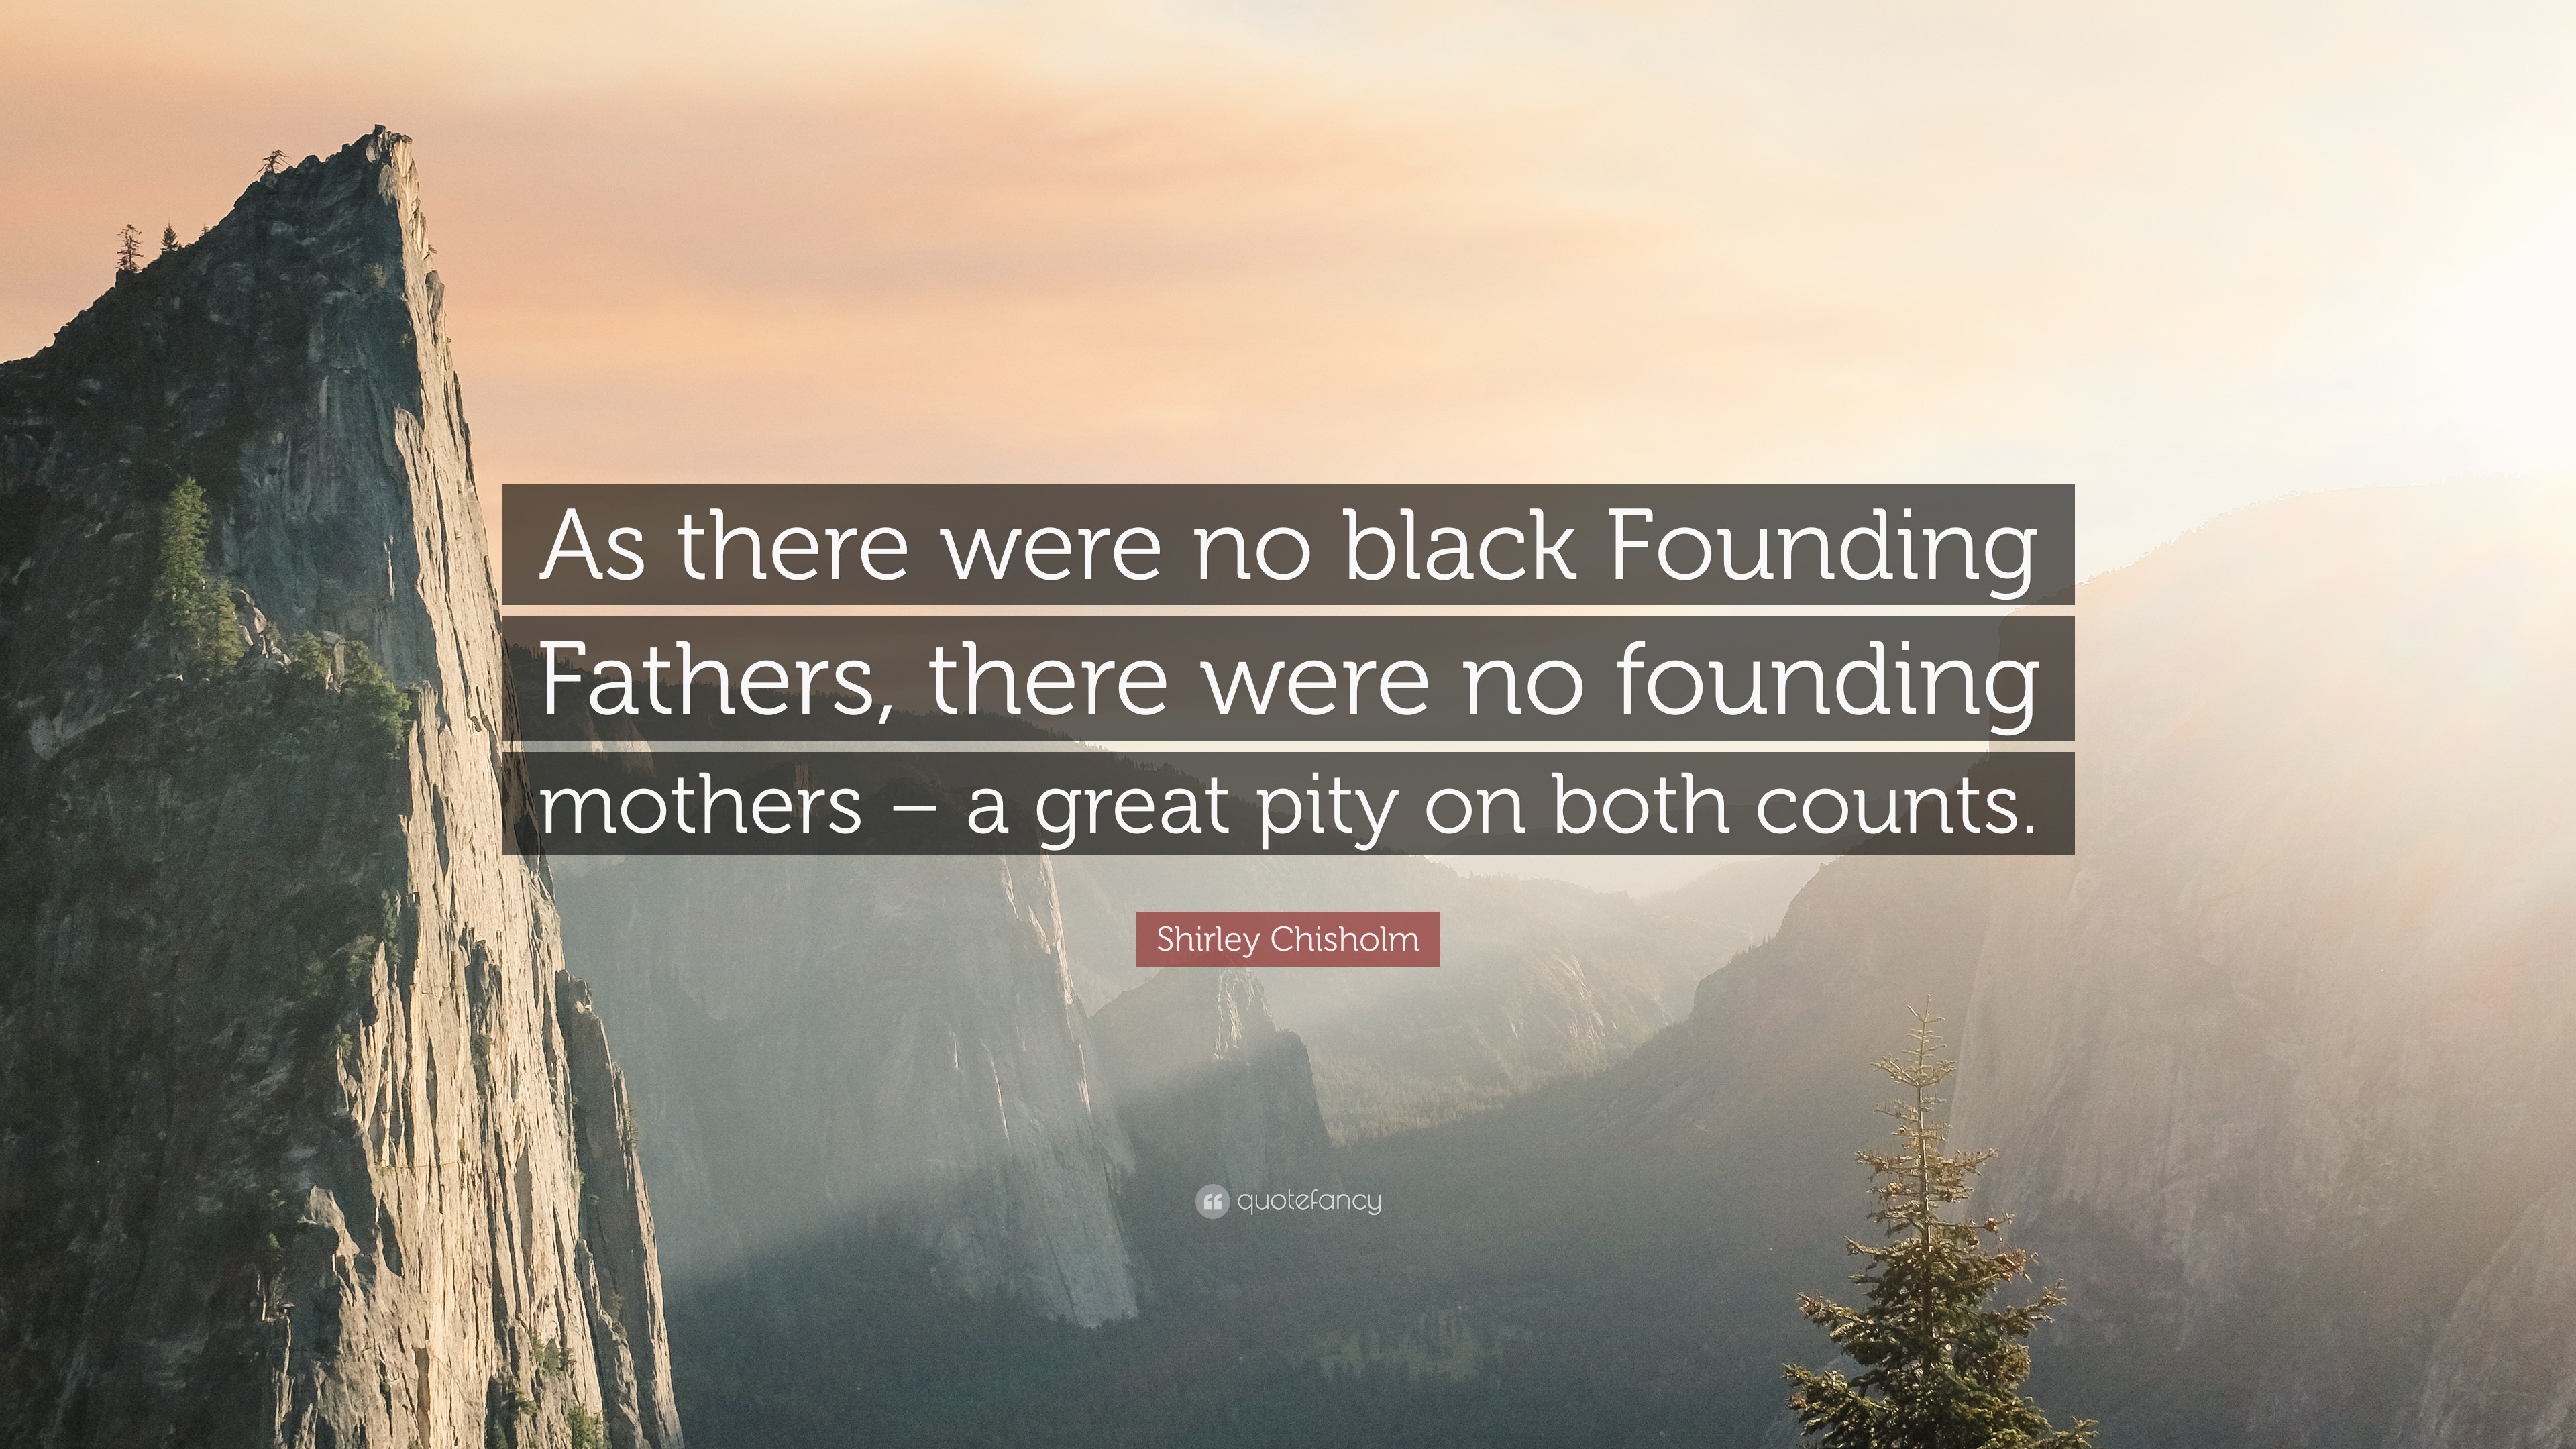 3840x2160 Shirley Chisholm Quote: “As there were no black Founding Fathers, there  were no